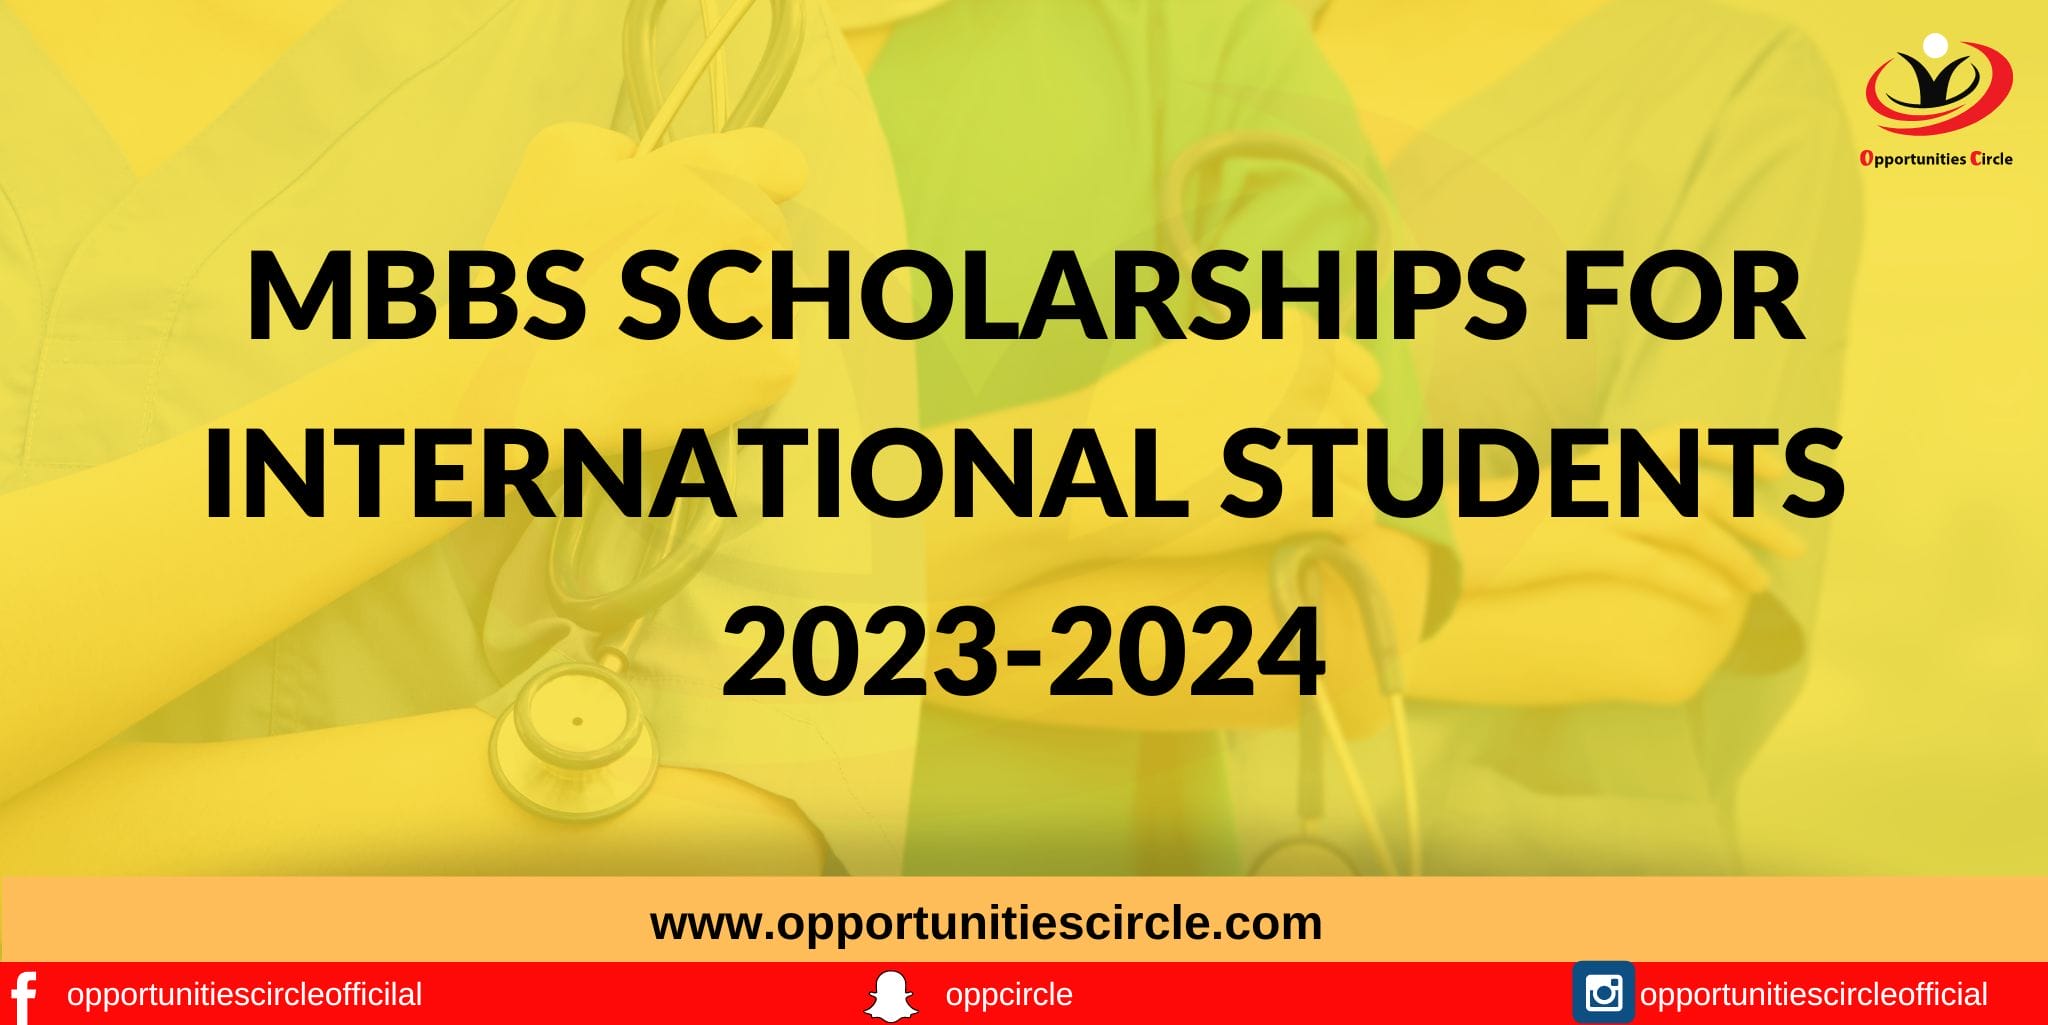 MBBS Scholarships for International Students 20232024 Opportunities Circle